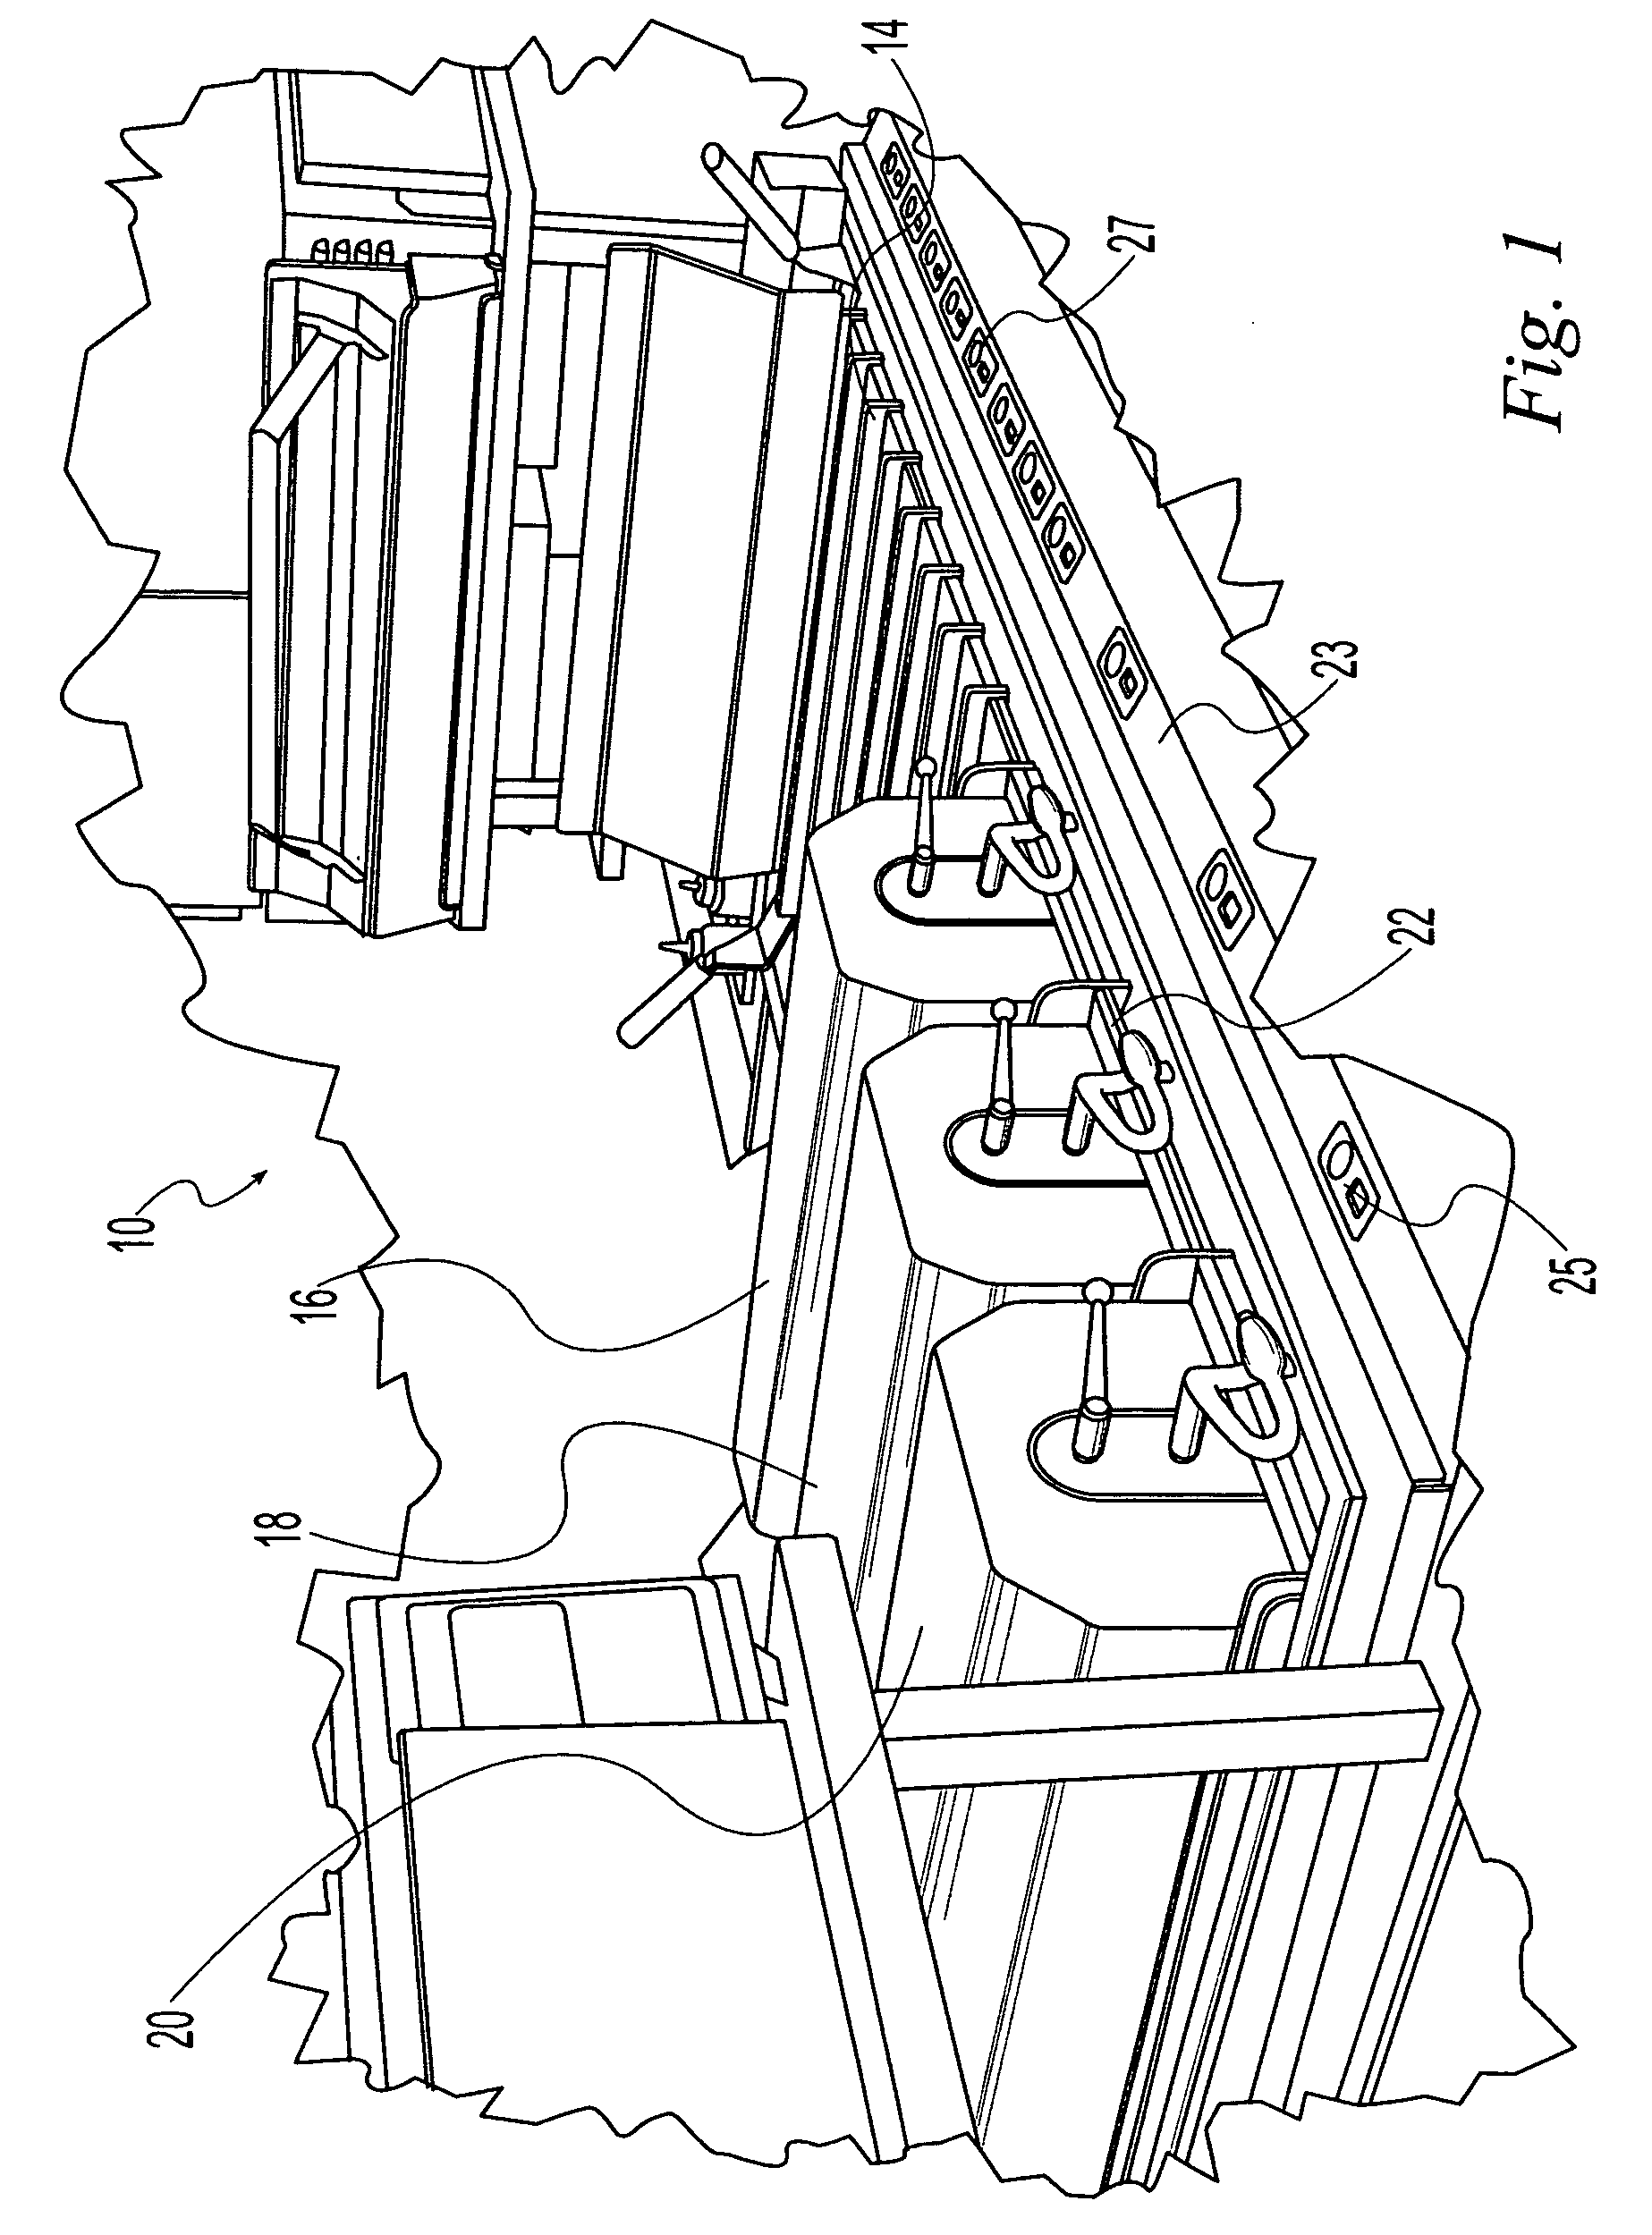 Double sided grill with automated control including localized prompting and confirmation of manual operations